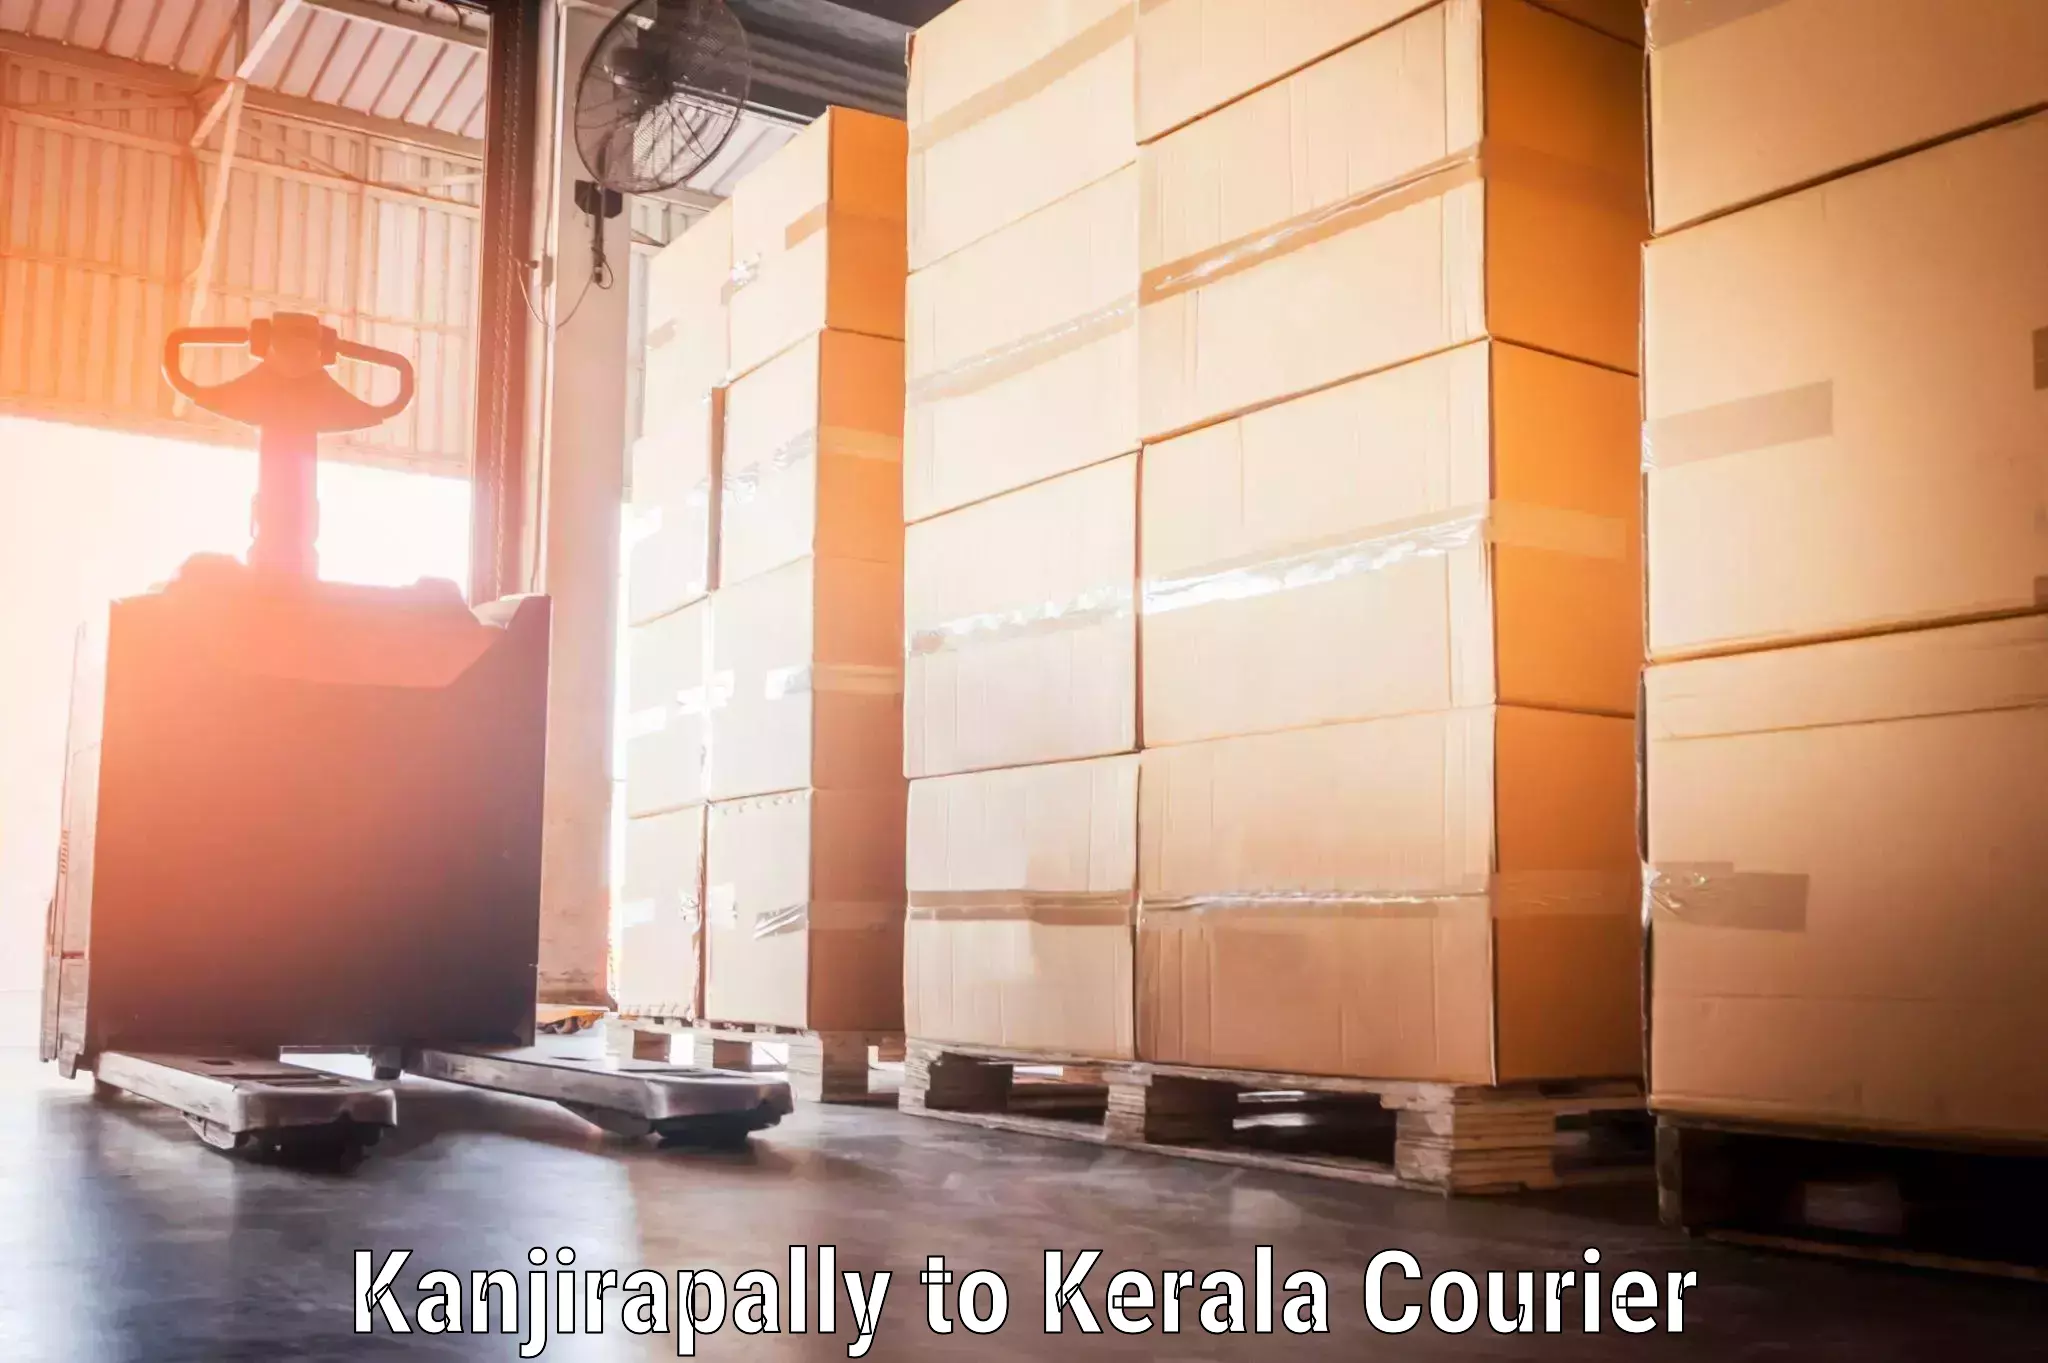 Instant baggage transport quote Kanjirapally to Cochin Port Kochi